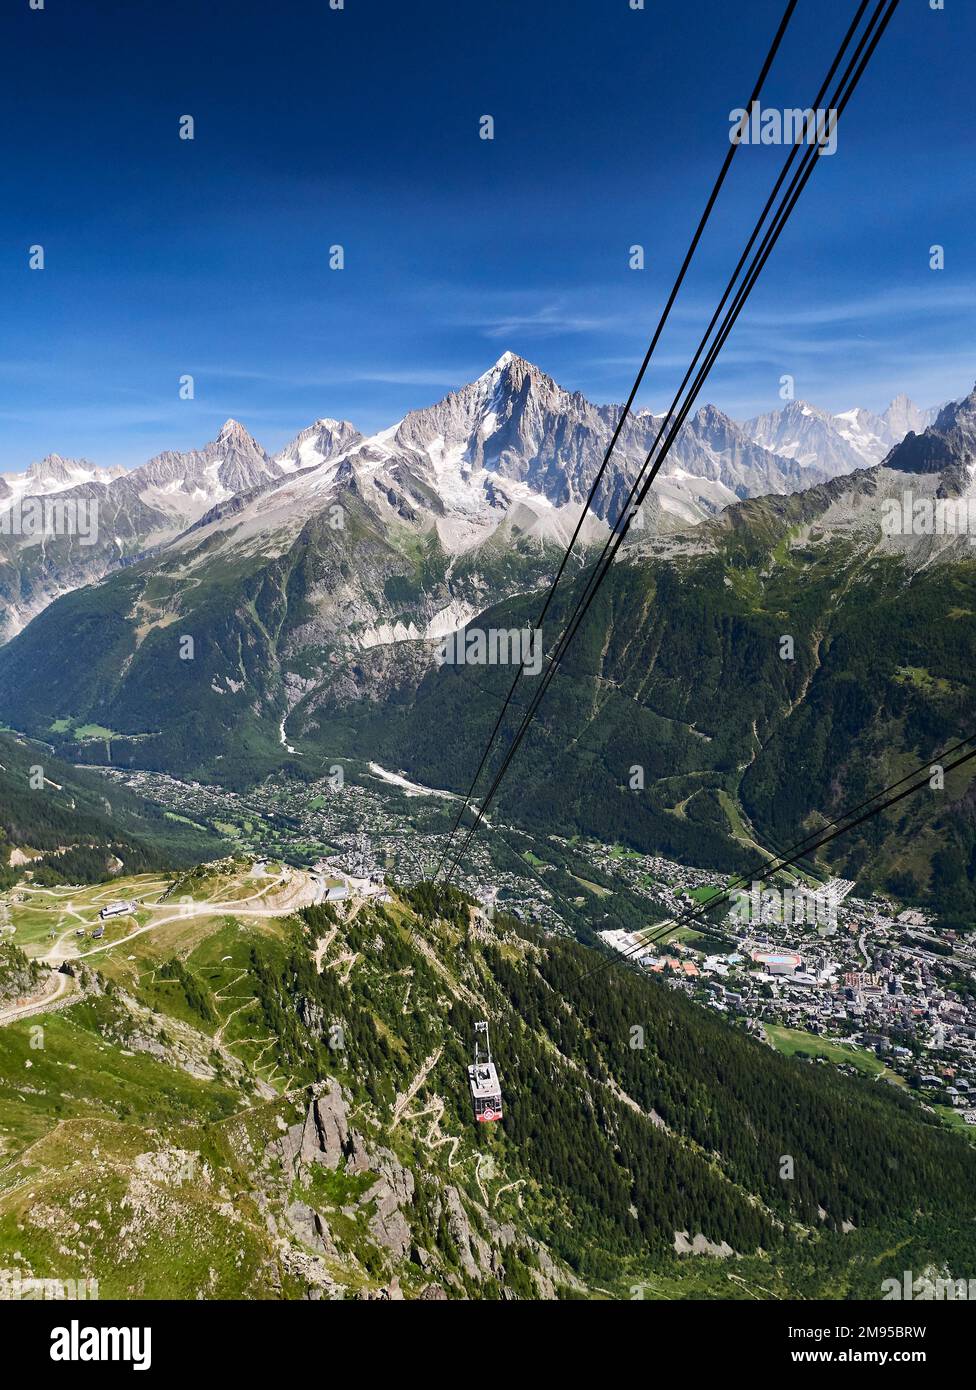 The Brevent cable car in the Valley of Chamonix Stock Photo - Alamy